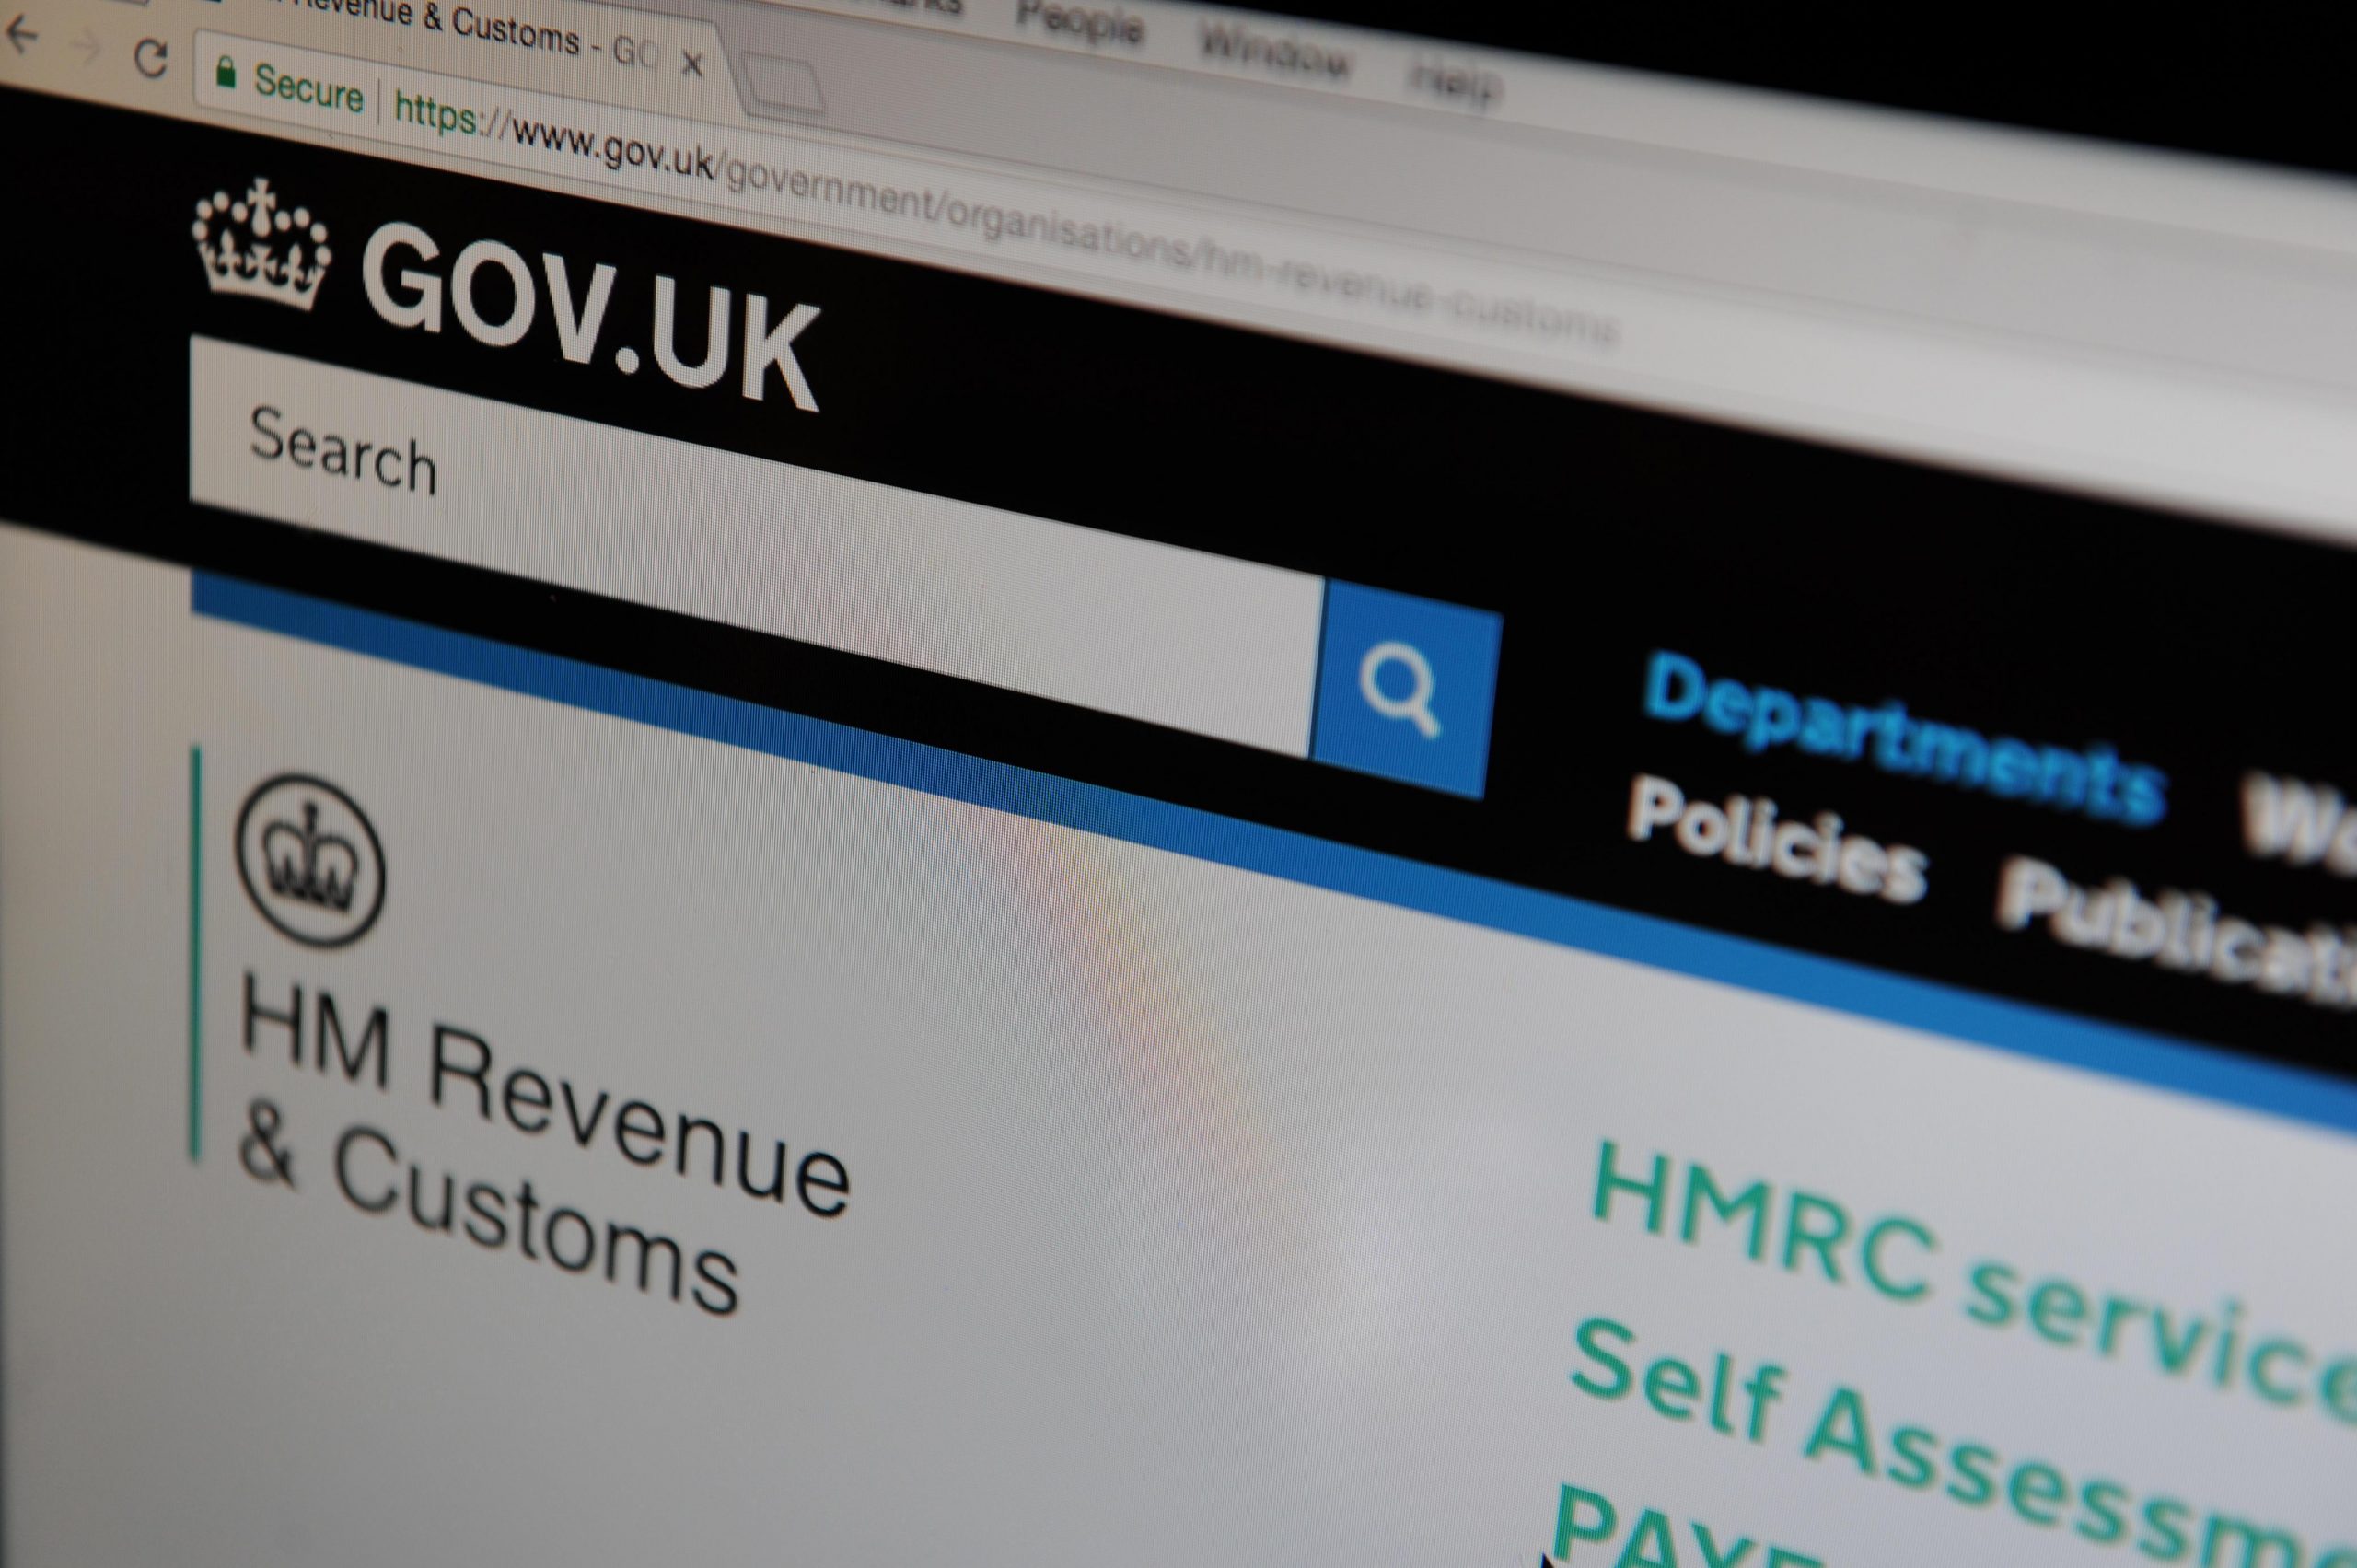 How do I pay my Self Assessment Tax Bill?